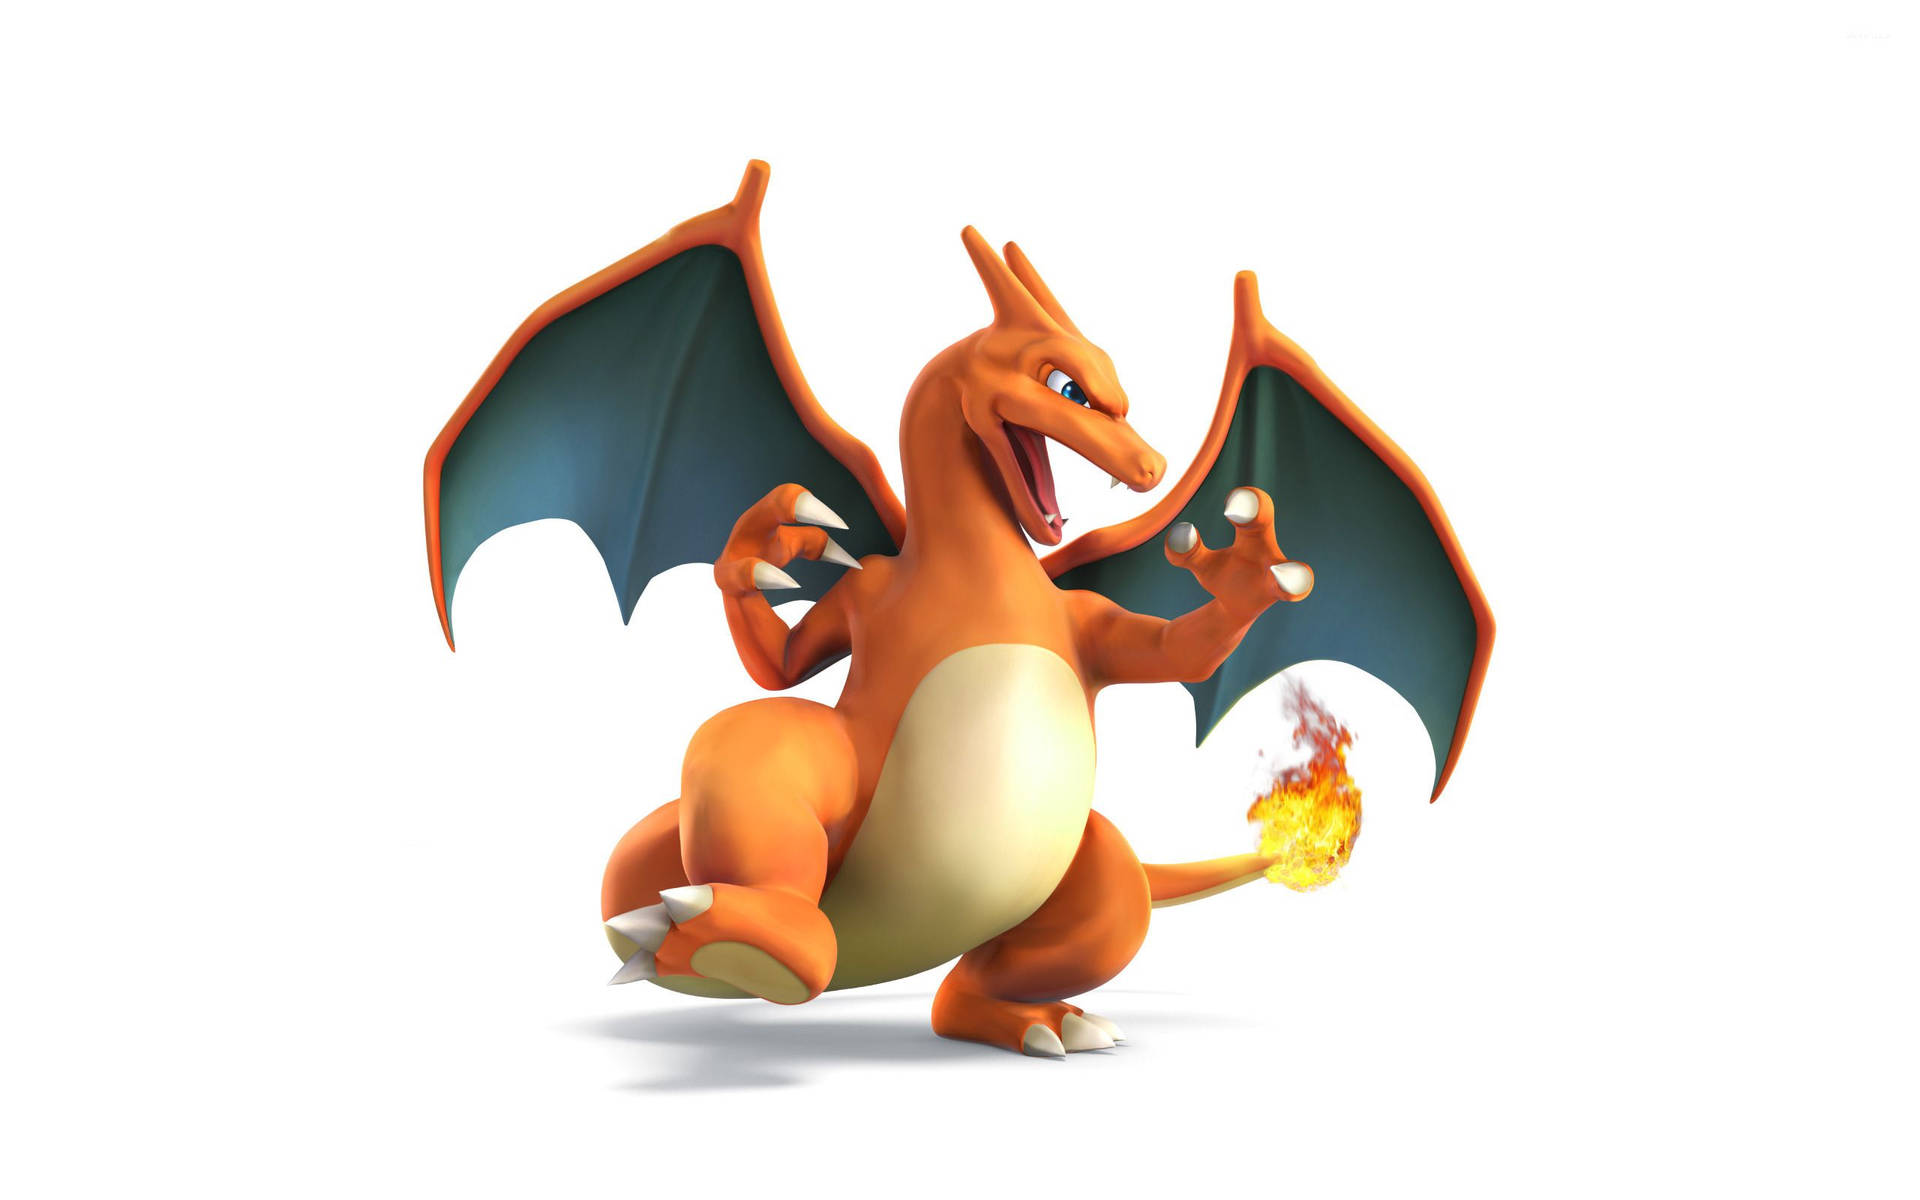 100+] Charizard Wallpapers | Wallpapers.com